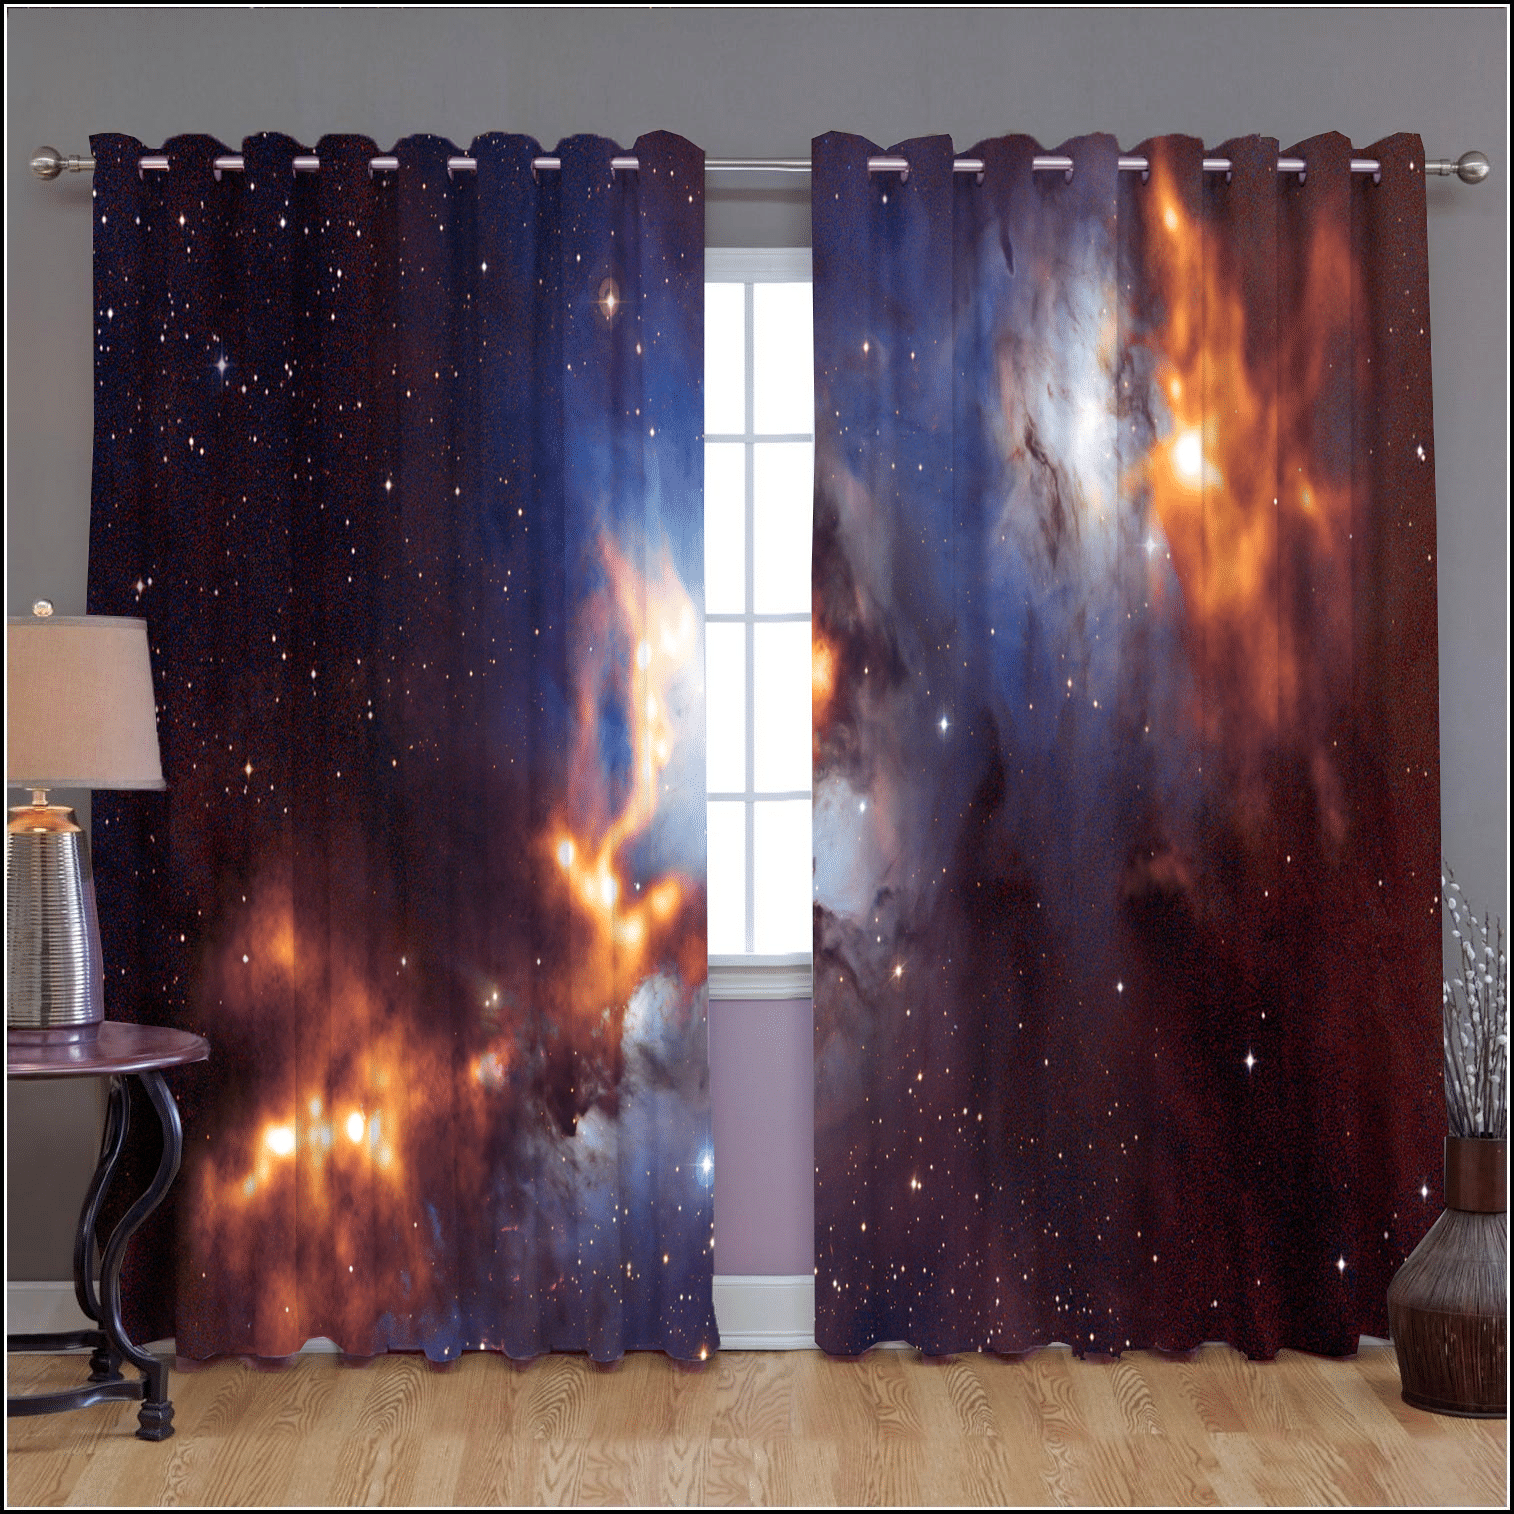 The Great Of Cosmos Printed Window Curtain